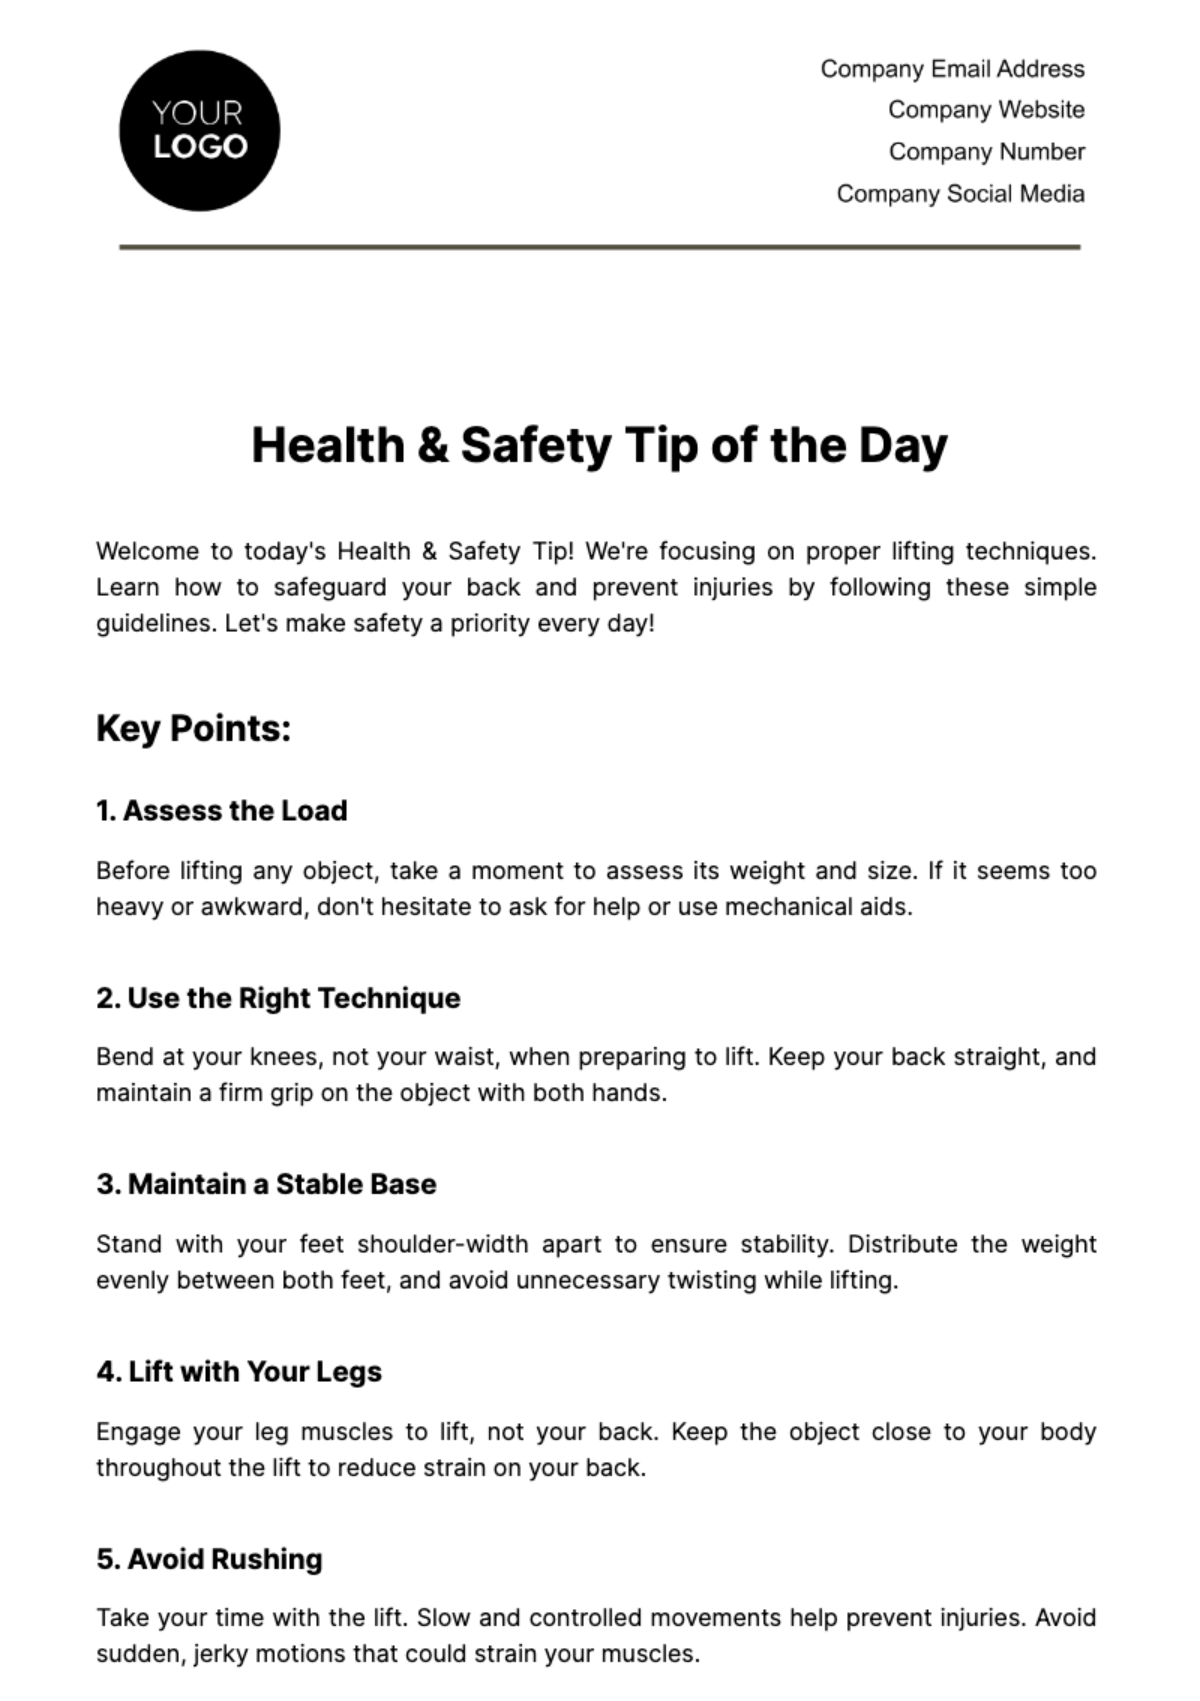 Health & Safety Tip of the Day Template